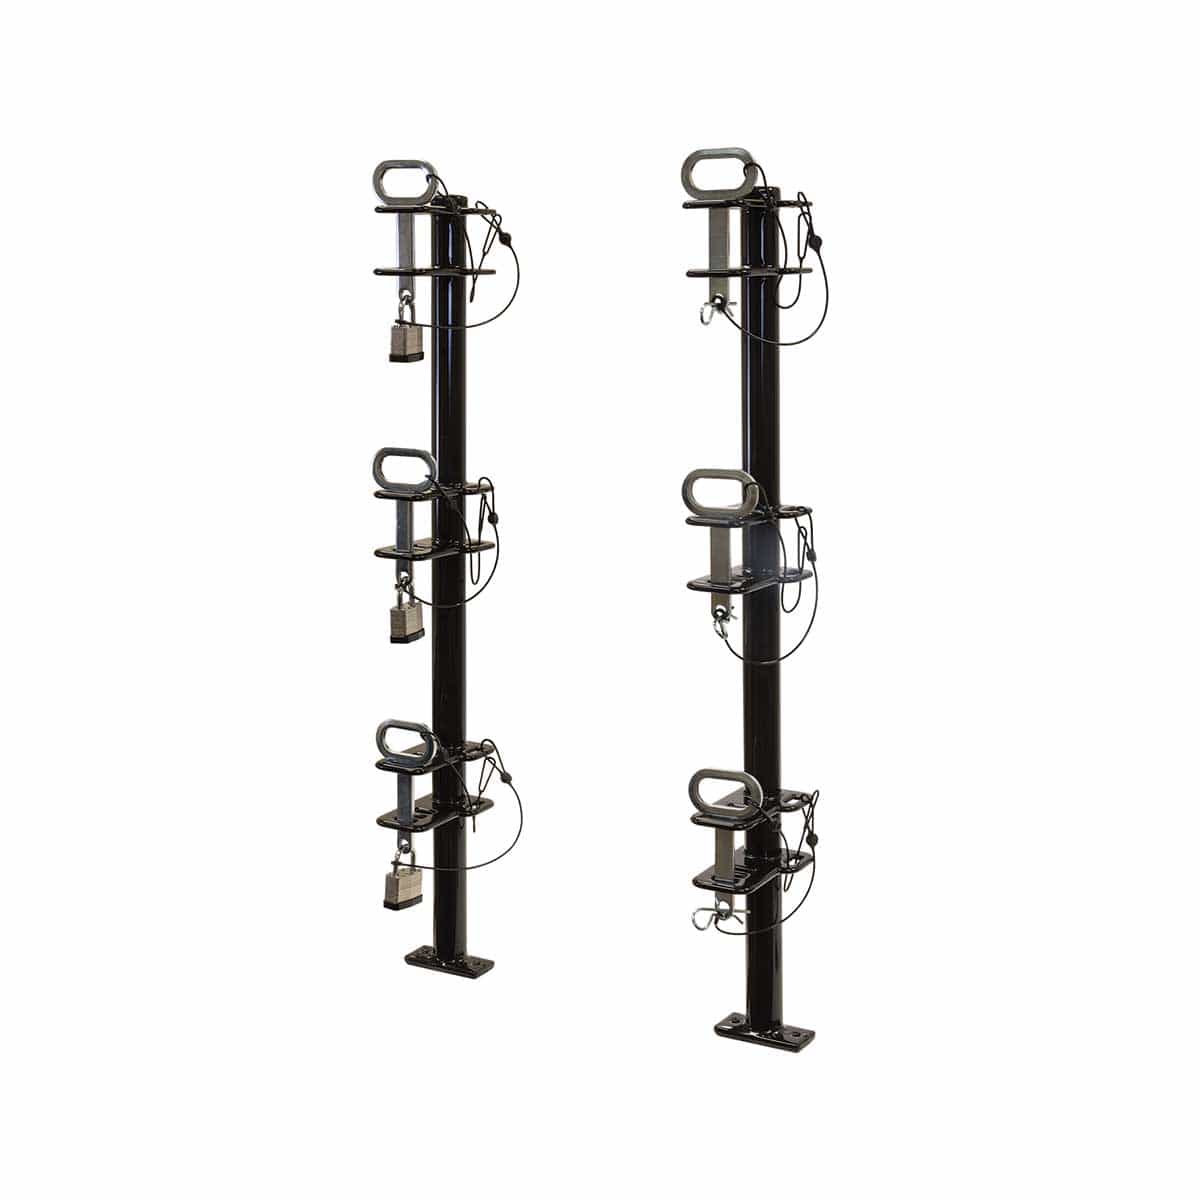 Buyers Products 3-Position Channel Style Lockable Trimmer Rack